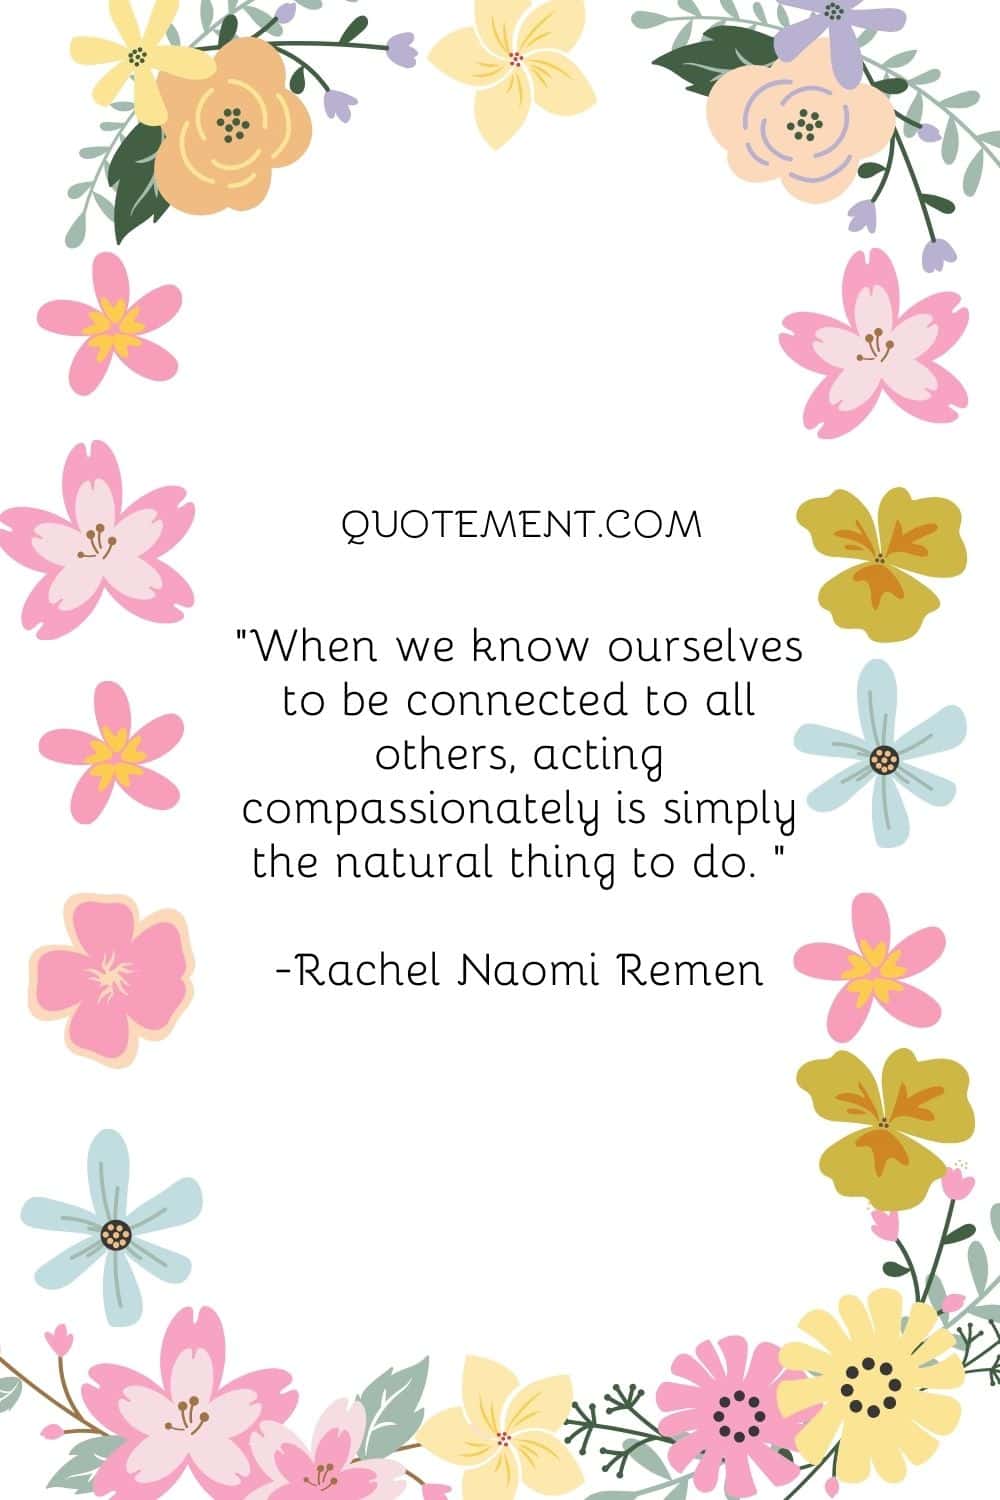 When we know ourselves to be connected to all others, acting compassionately is simply the natural thing to do.